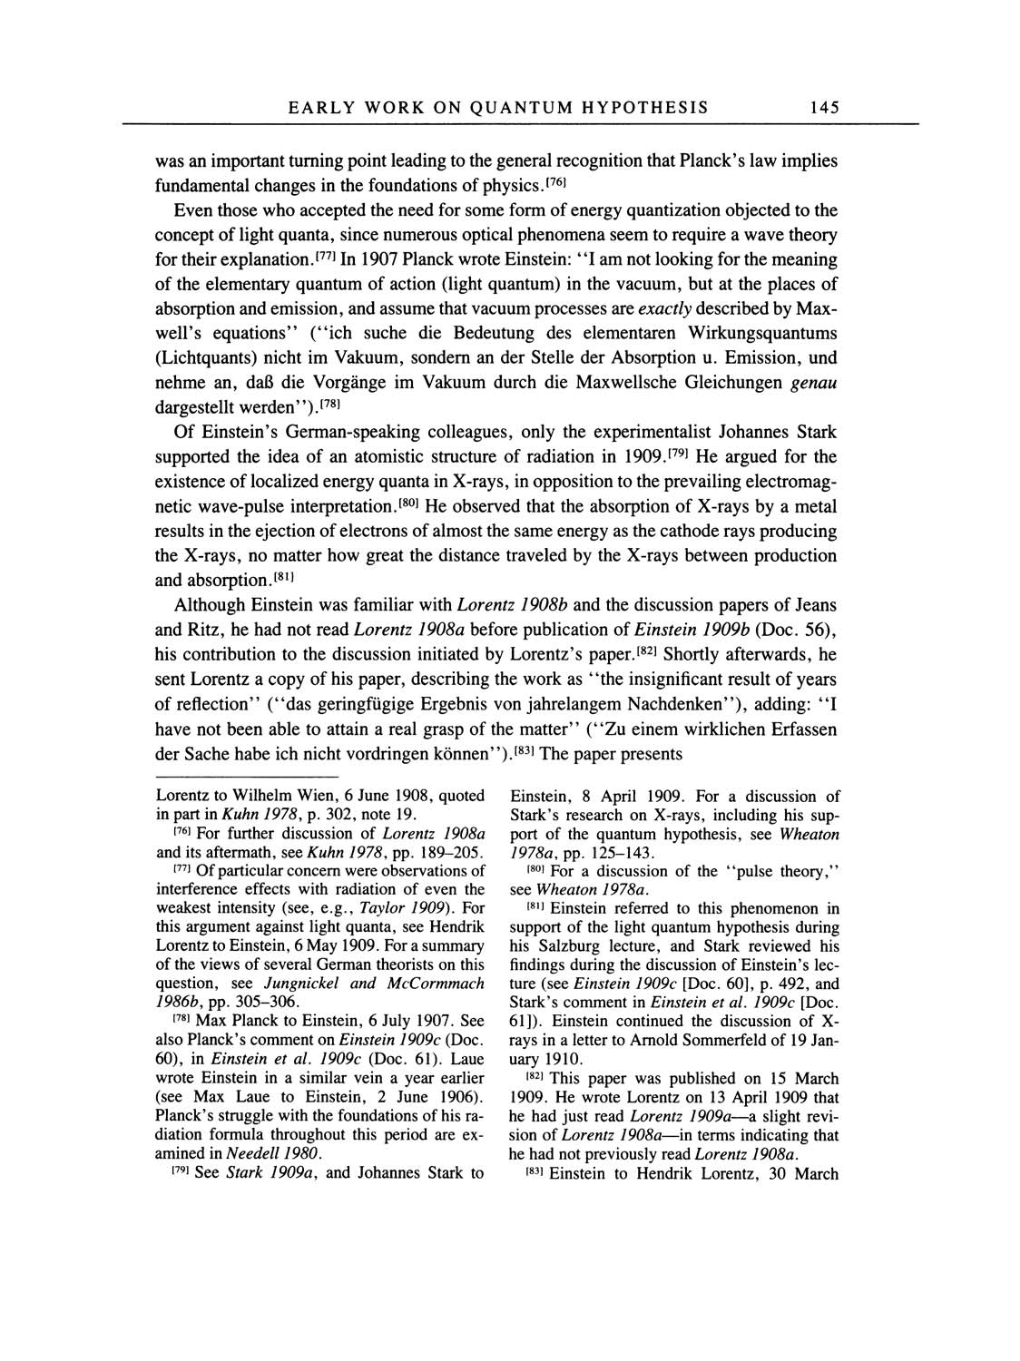 Volume 2: The Swiss Years: Writings, 1900-1909 page 145